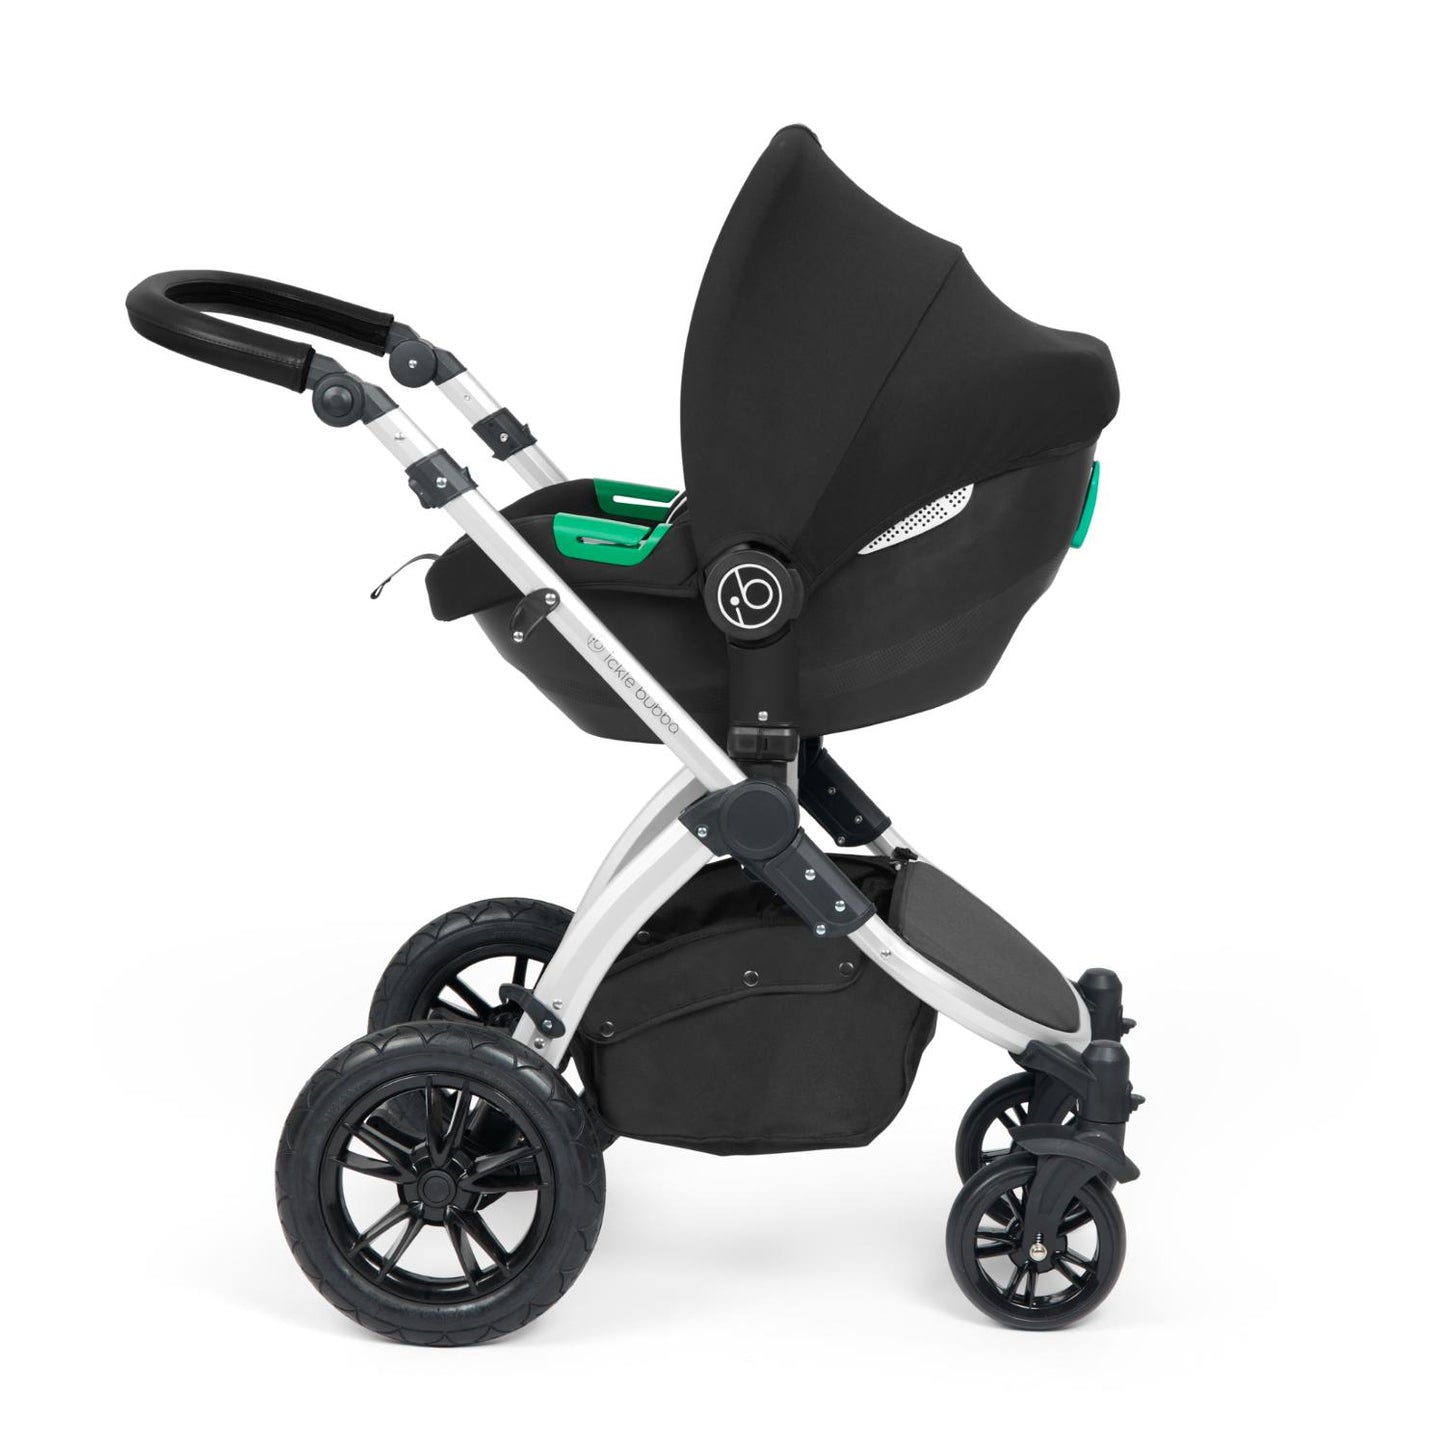 Ickle Bubba Stomp Luxe Pushchair with Cirrus i-Size car seat attached in Midnight black colour with silver chassis